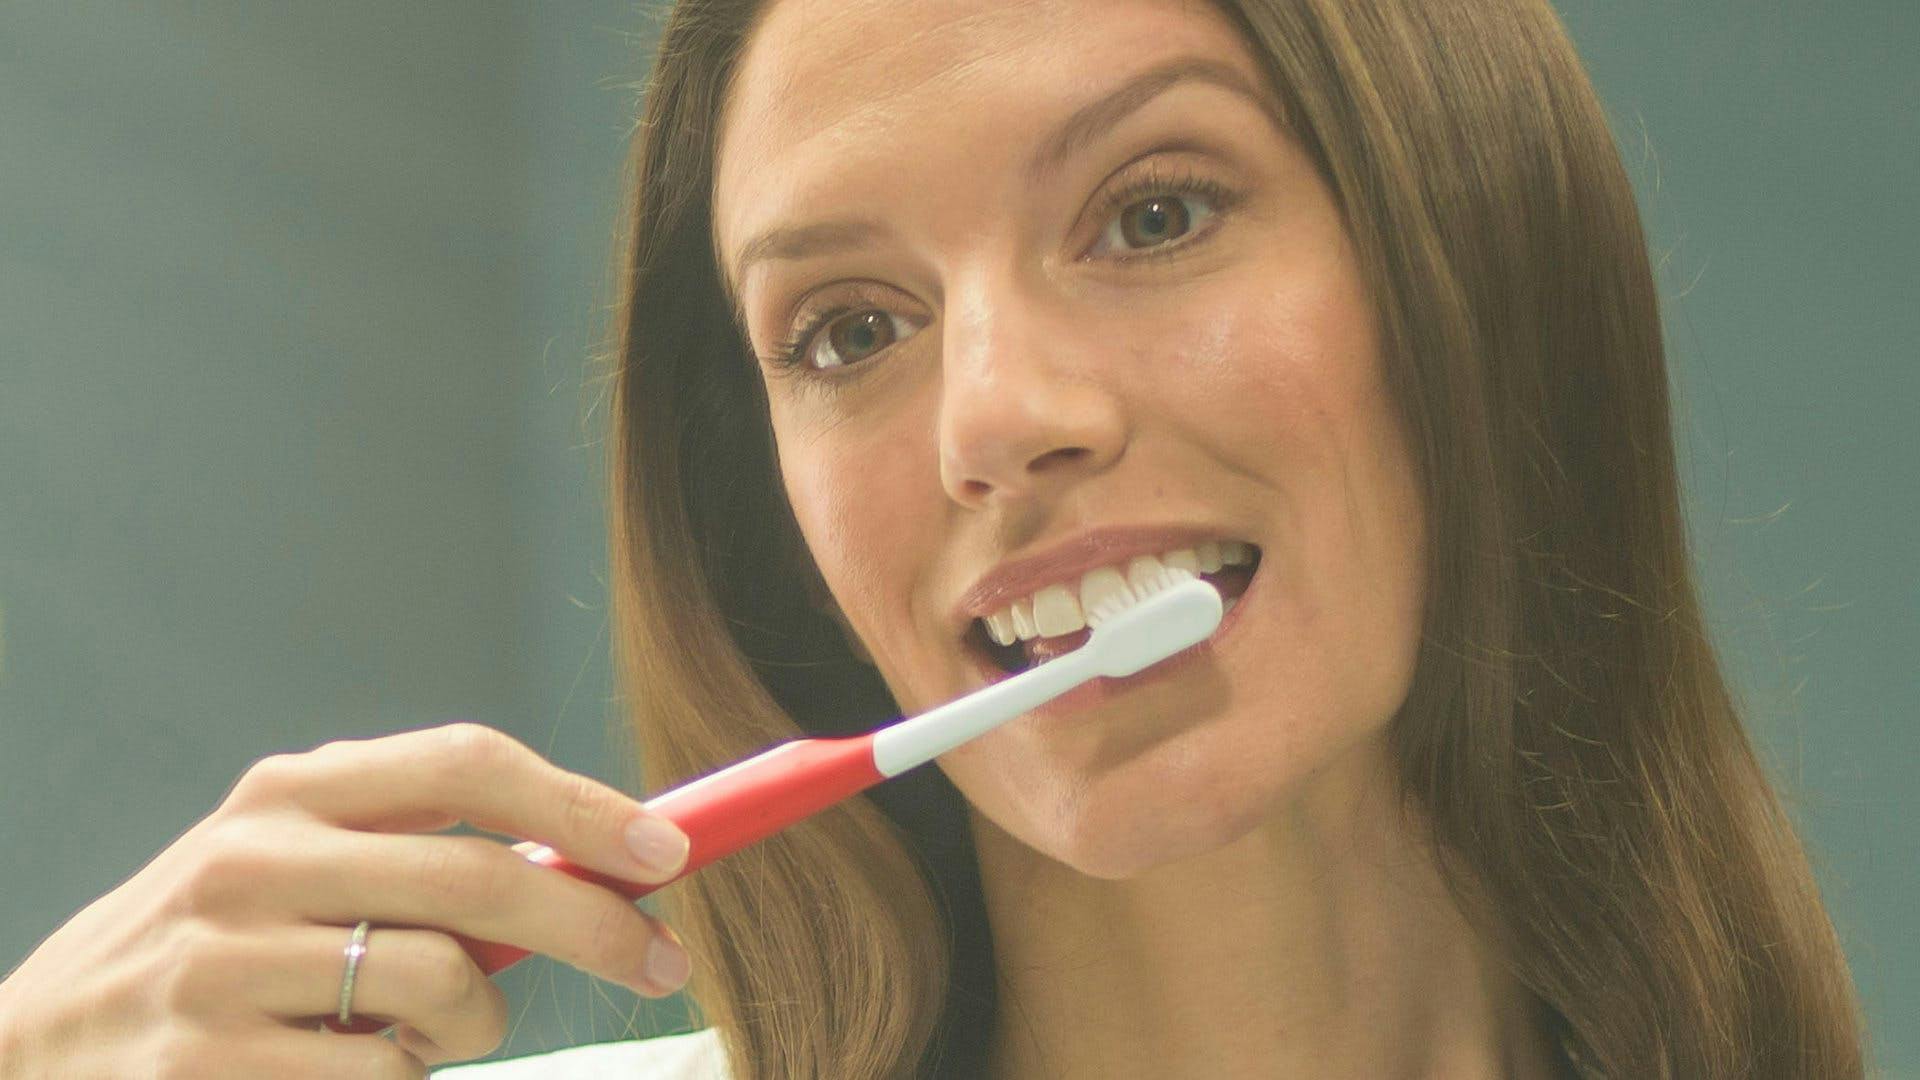 Woman looking into sink holding a toothbrush